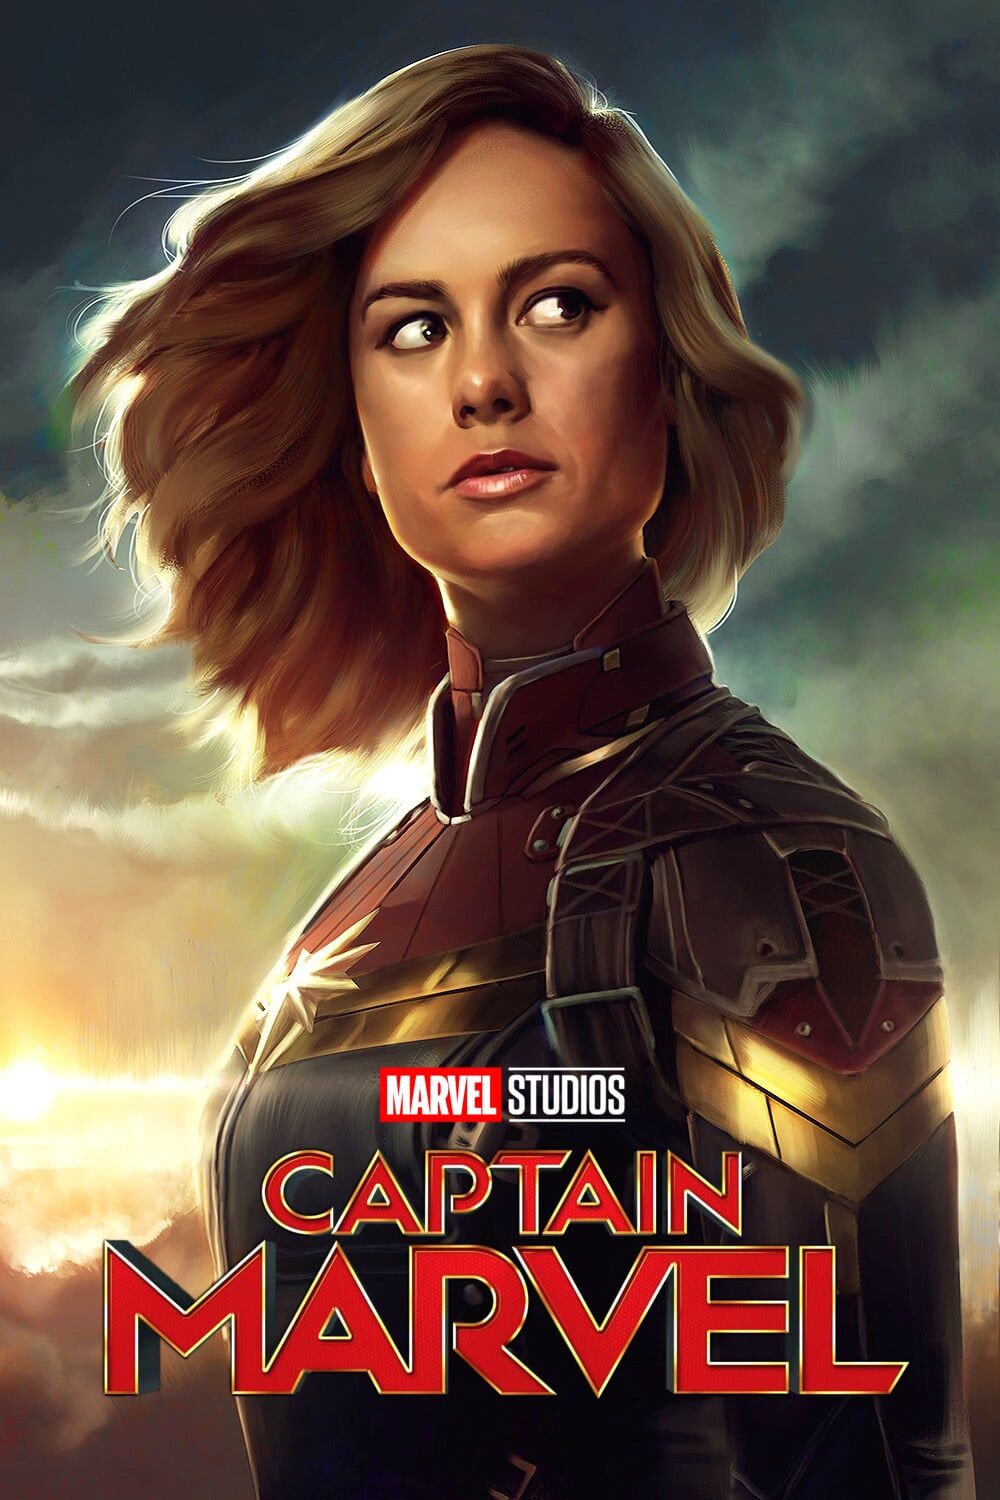 https://static.wikia.nocookie.net/headhuntersholosuite/images/3/3a/Captain_Marvel_%282019%29_003.jpg/revision/latest/scale-to-width-down/1000?cb=20181204174107